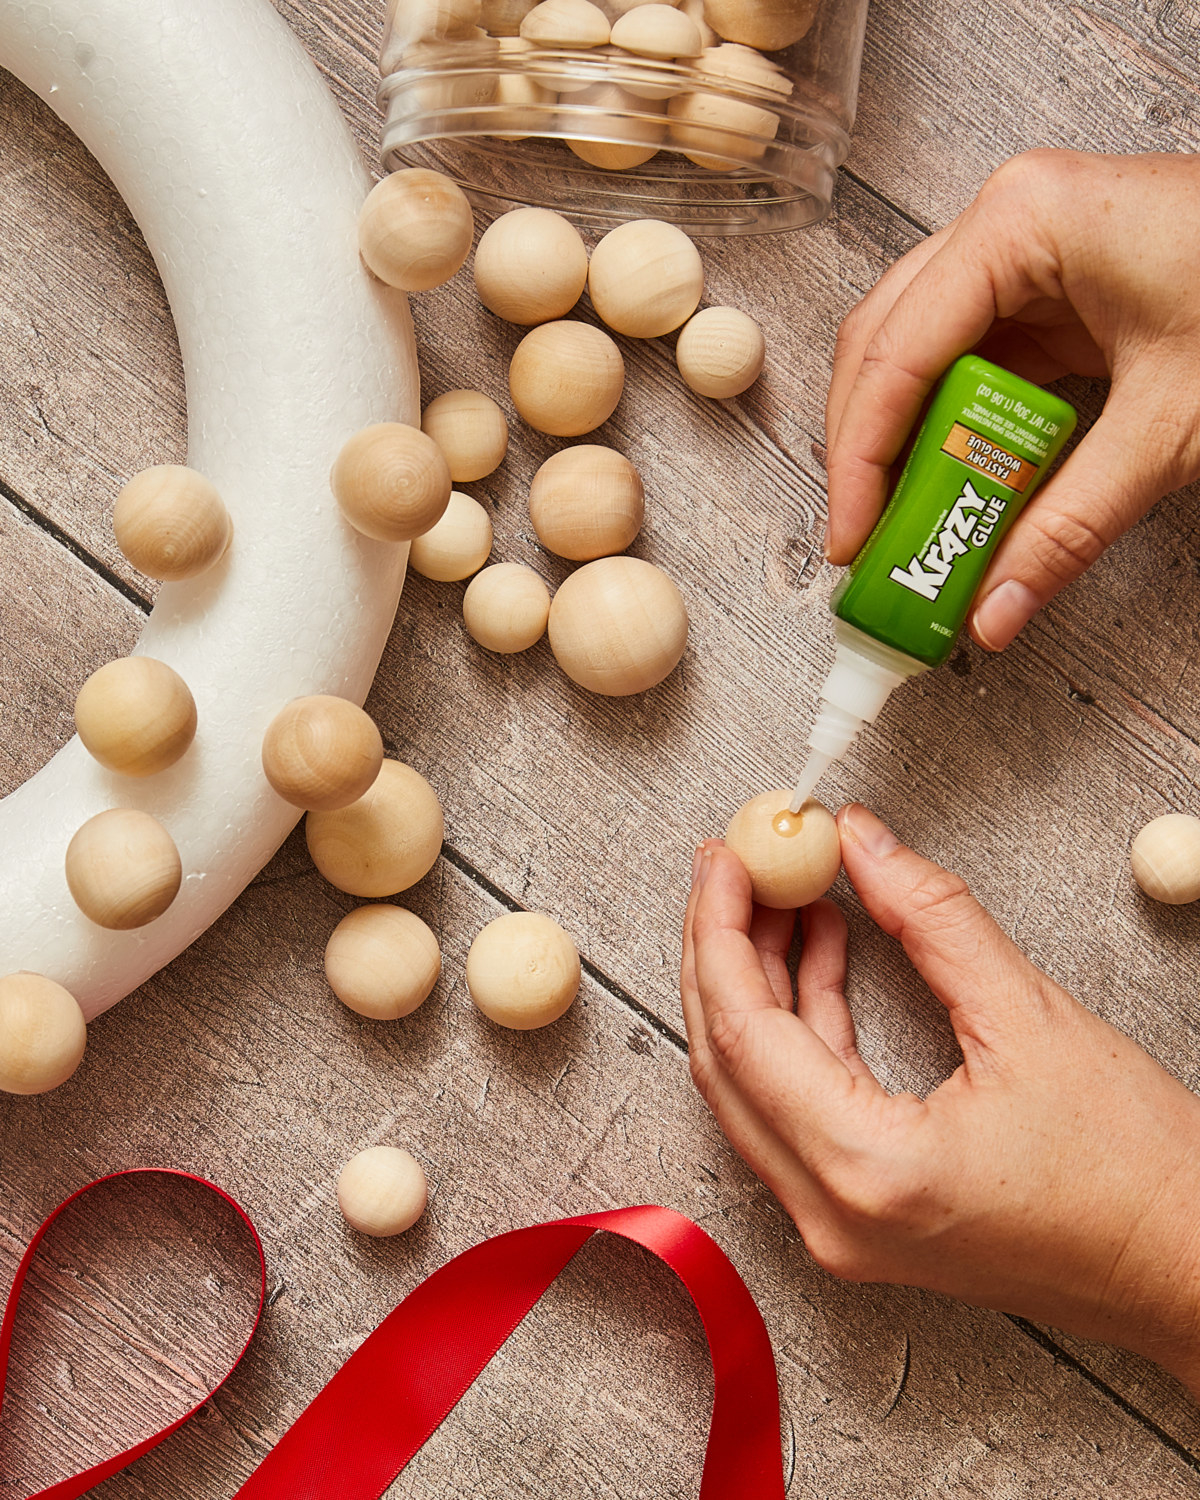 Person Krazy Gluing unpainted wooden balls to wreath form.